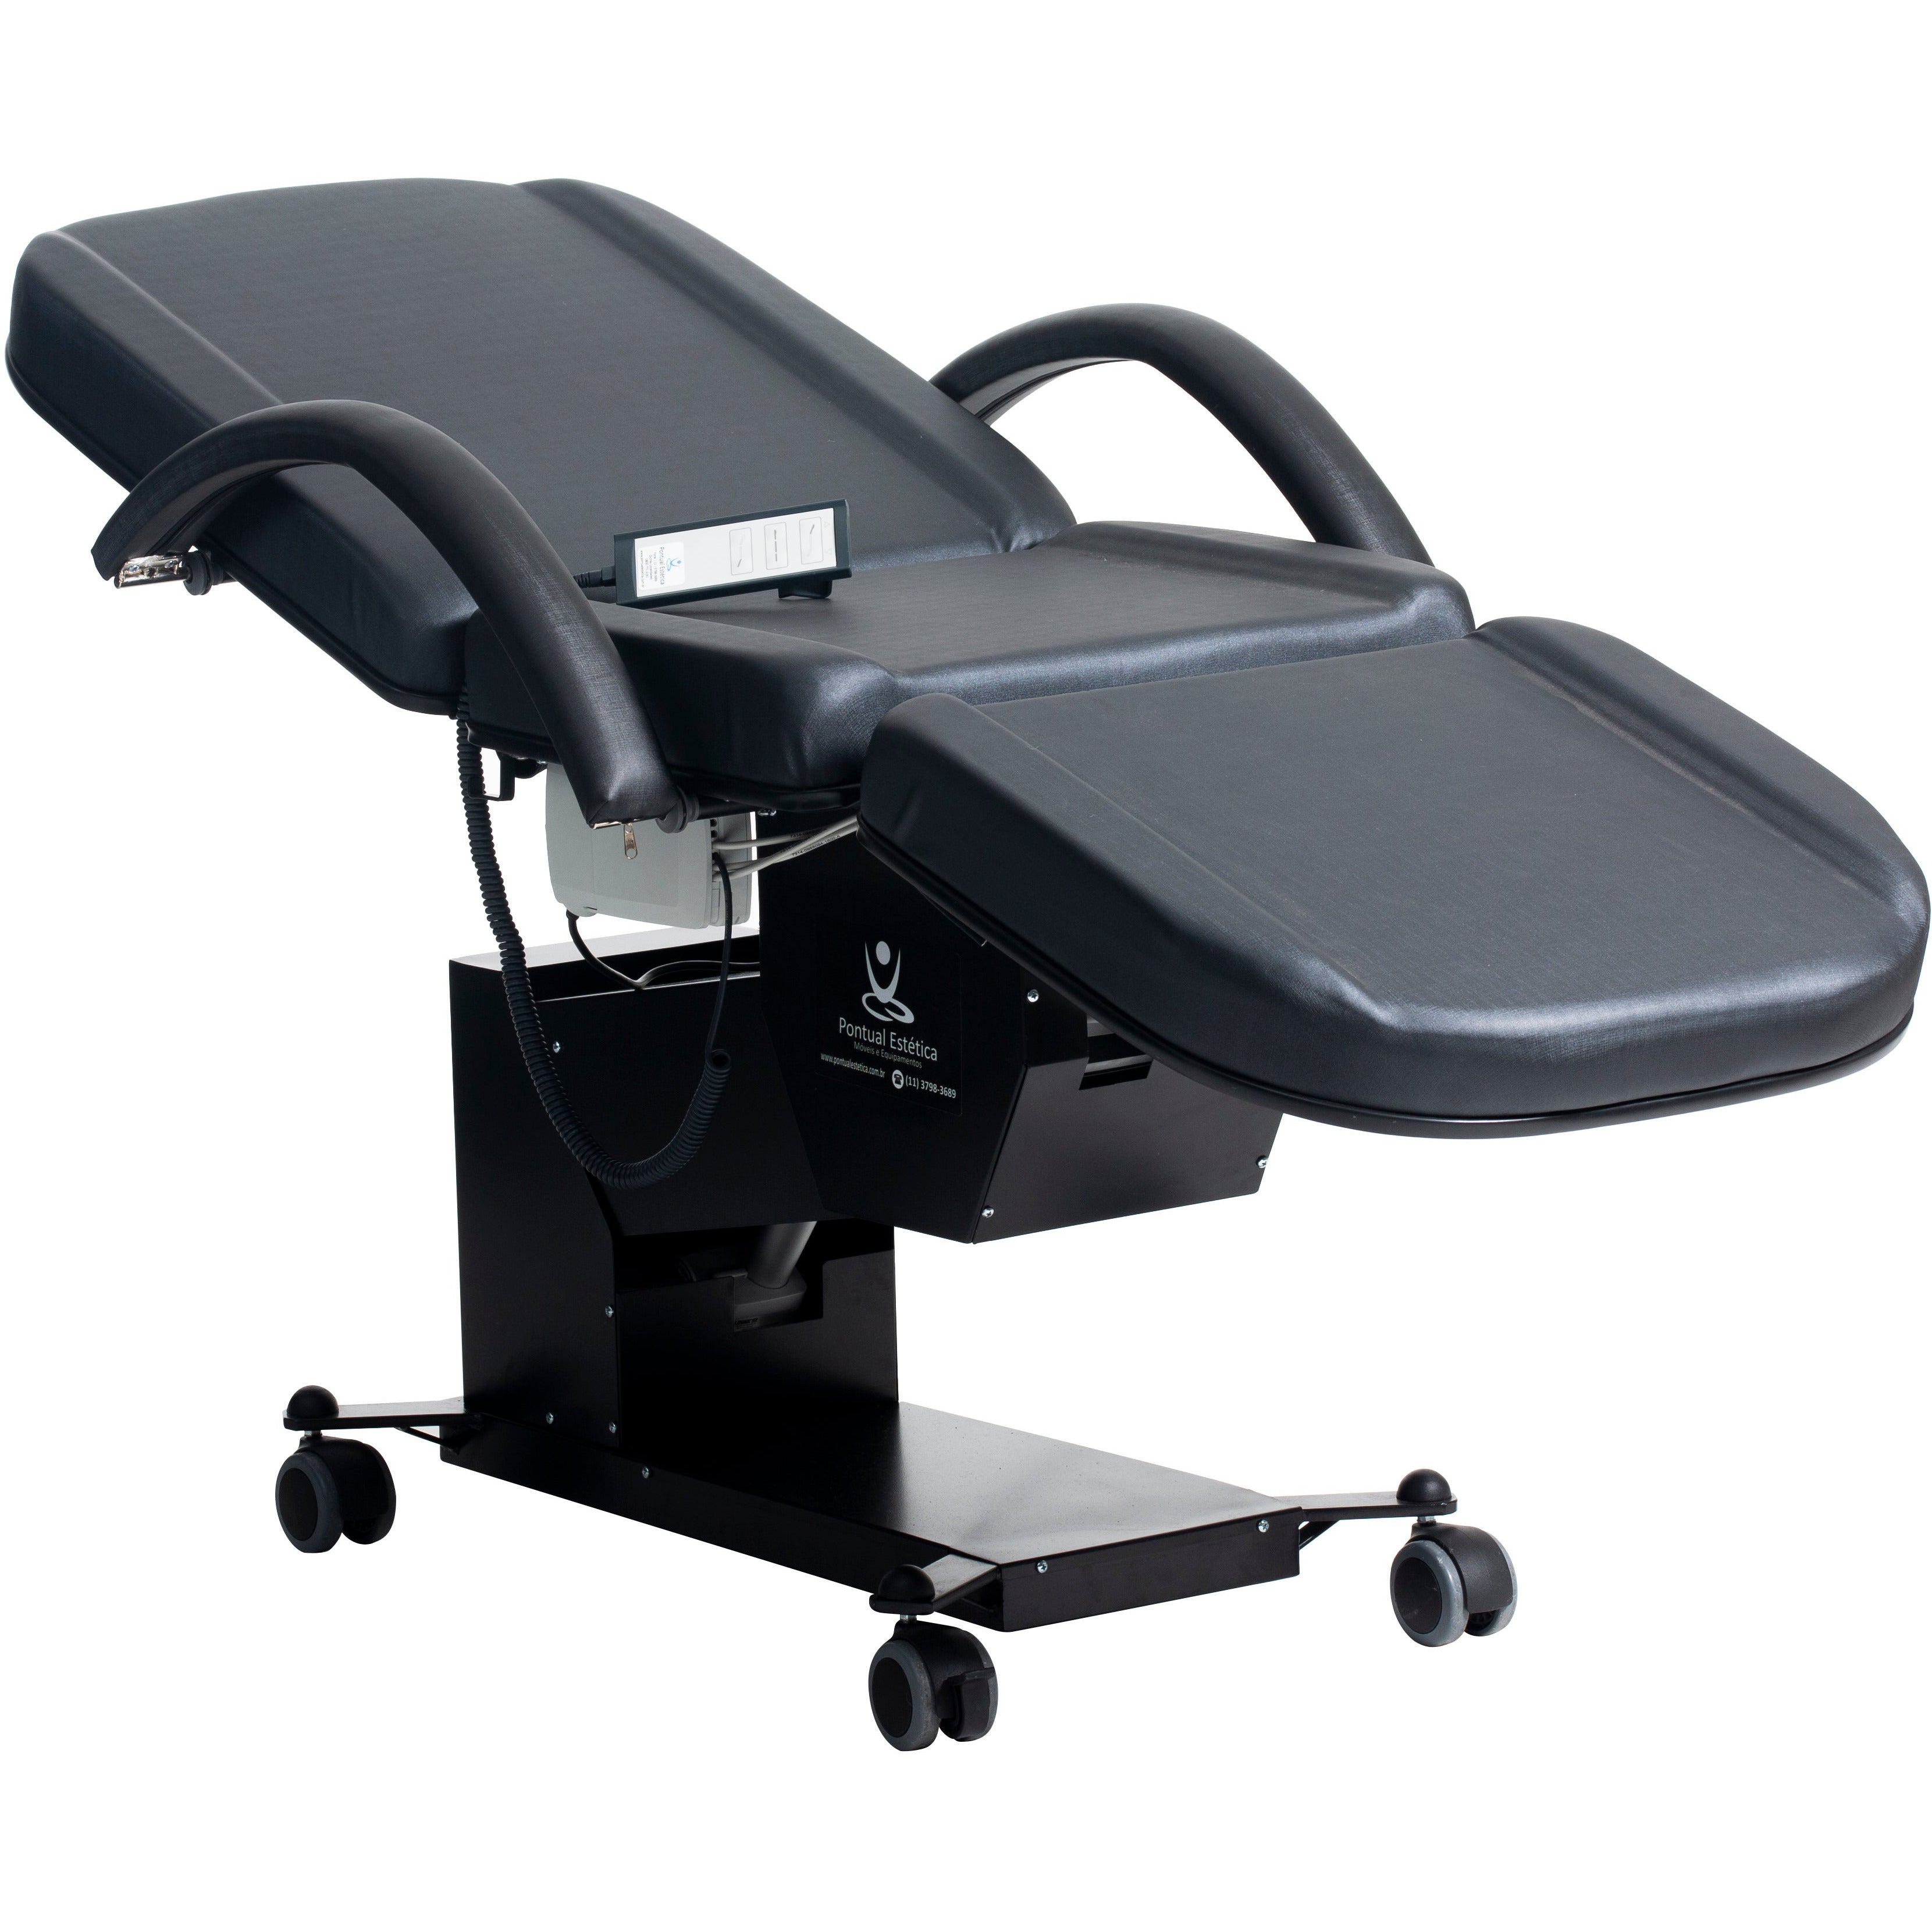 Pavo Electrical Rotating Medical Spa Chair  4 Motors  Salon Equipment  Center